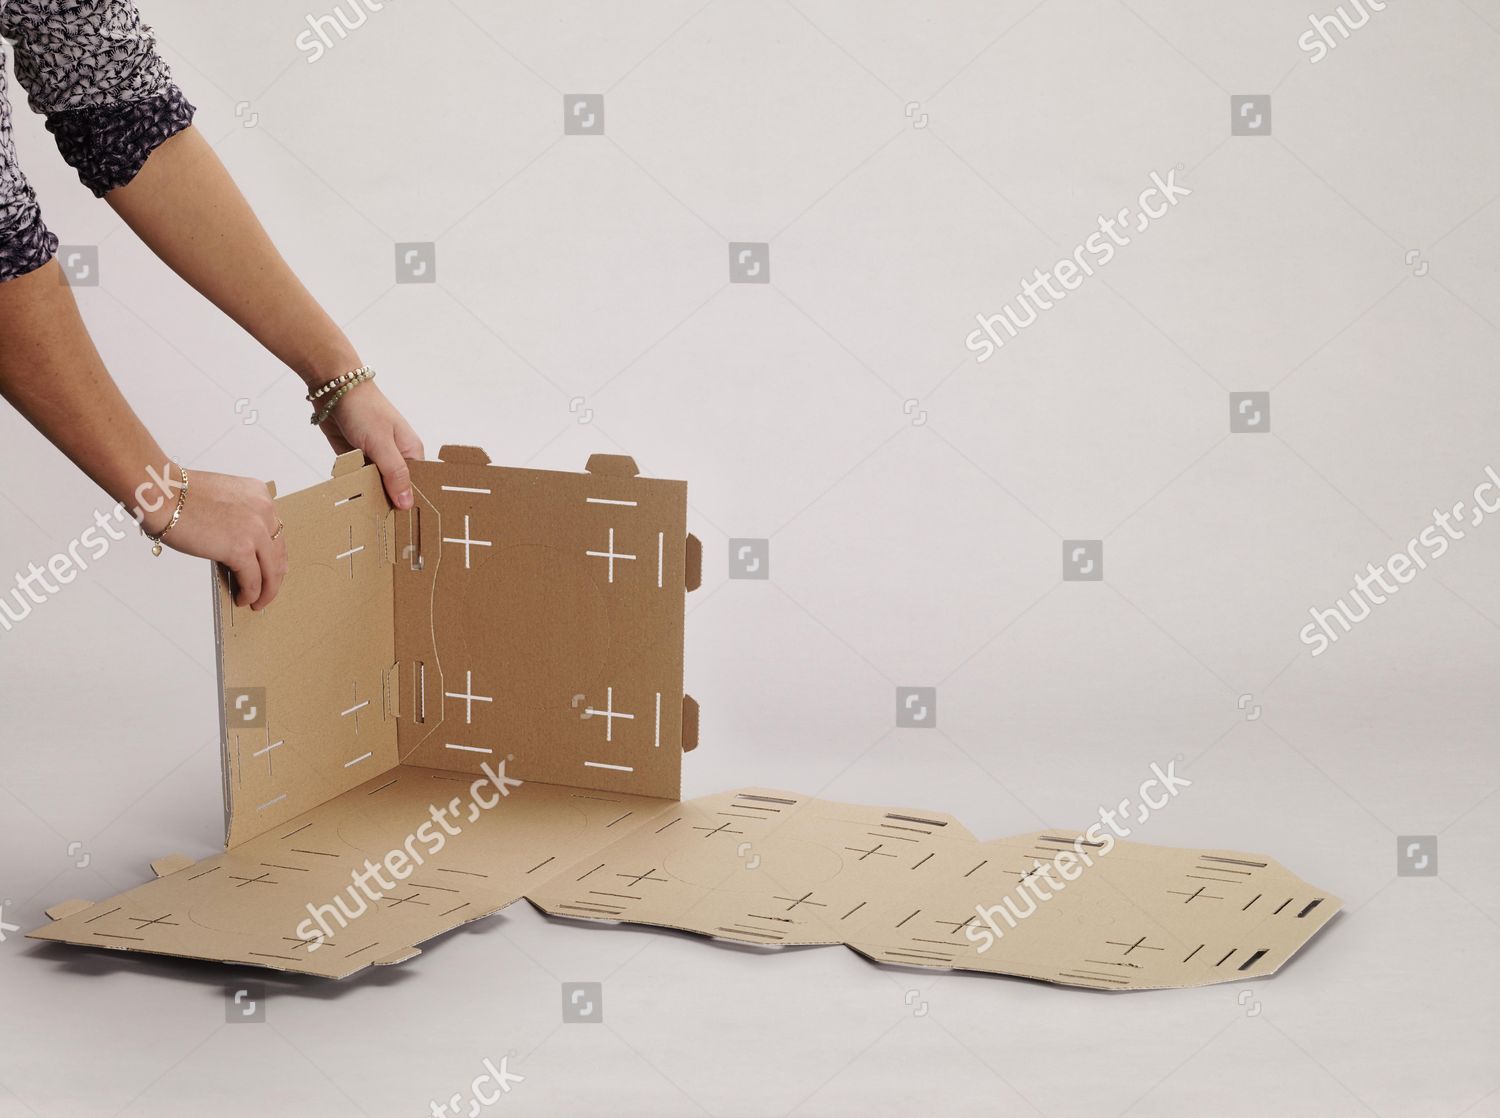 Flatpack Blocks Product Being Assembled Editorial Stock Photo